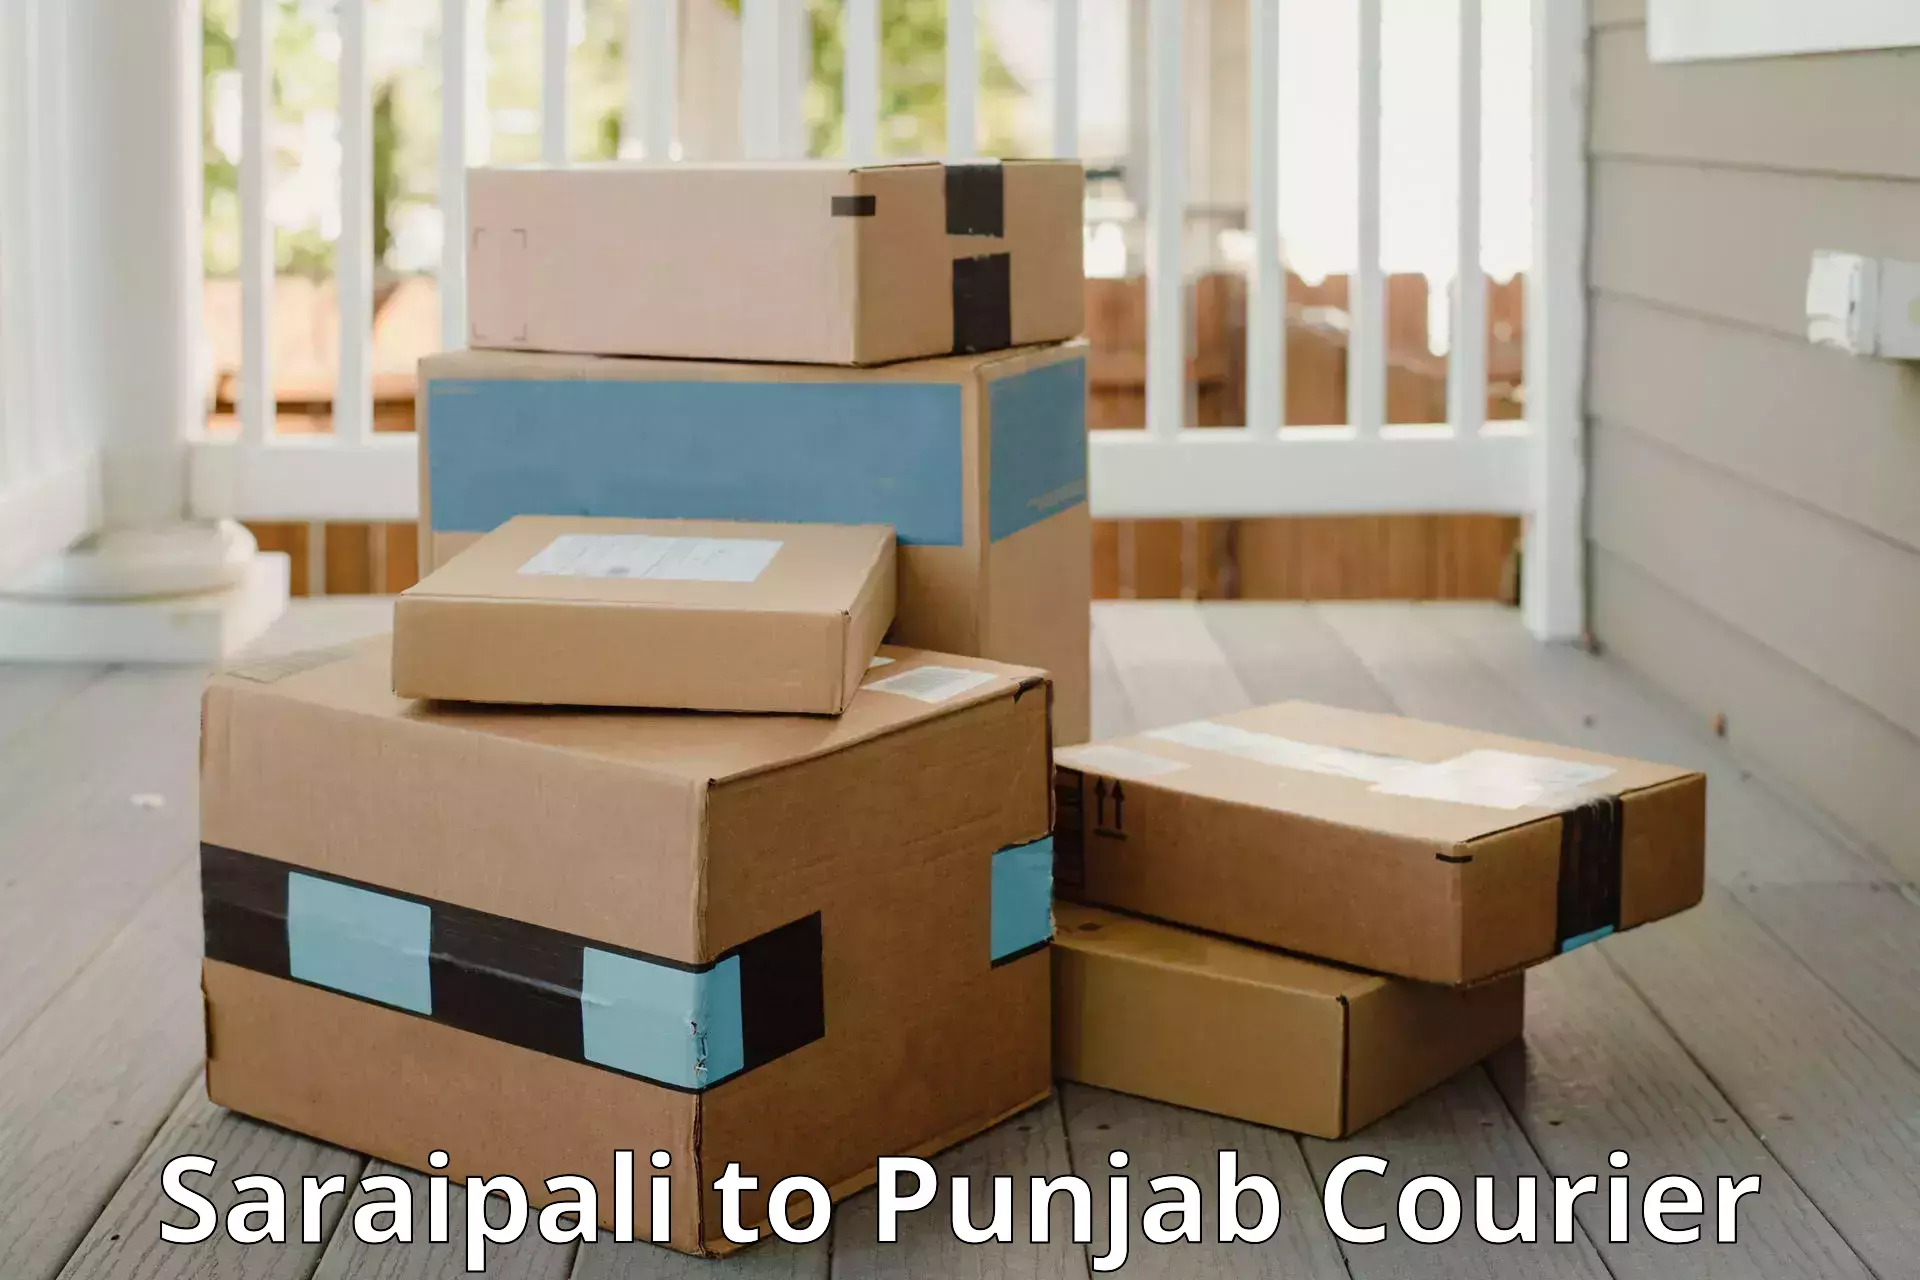 Luggage delivery providers Saraipali to Amritsar